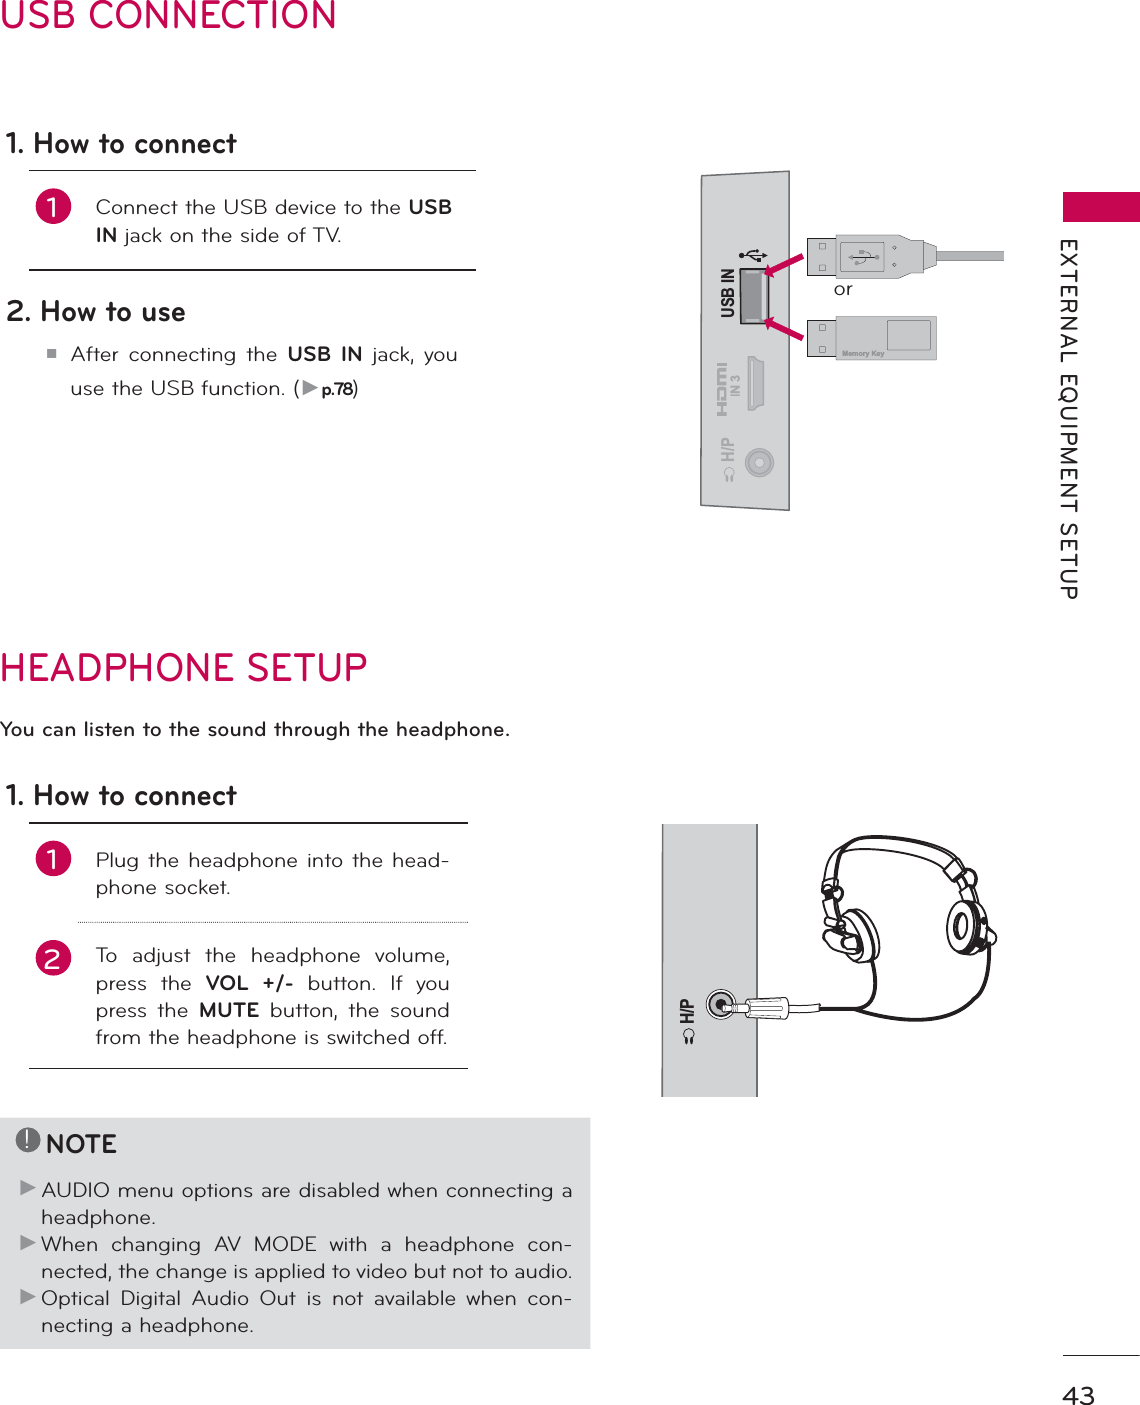 43EXTERNAL EQUIPMENT SETUPUSB CONNECTIONUSB ININ 3H/PMemory Keyor1. How to connect1 Connect the USB device to the USB IN jack on the side of TV. 2. How to useᯫ After connecting the USB IN jack, you use the USB function. (Źp.78)HEADPHONE SETUP H/PYou can listen to the sound through the headphone.1. How to connect1Plug the headphone into the head-phone socket.2To adjust the headphone volume, press the VOL +/- button. If you press the MUTE button, the sound from the headphone is switched off.!NOTEŹ AUDIO menu options are disabled when connecting a headphone.Ź When changing AV MODE with a headphone con-nected, the change is applied to video but not to audio.Ź Optical Digital Audio Out is not available when con-necting a headphone.